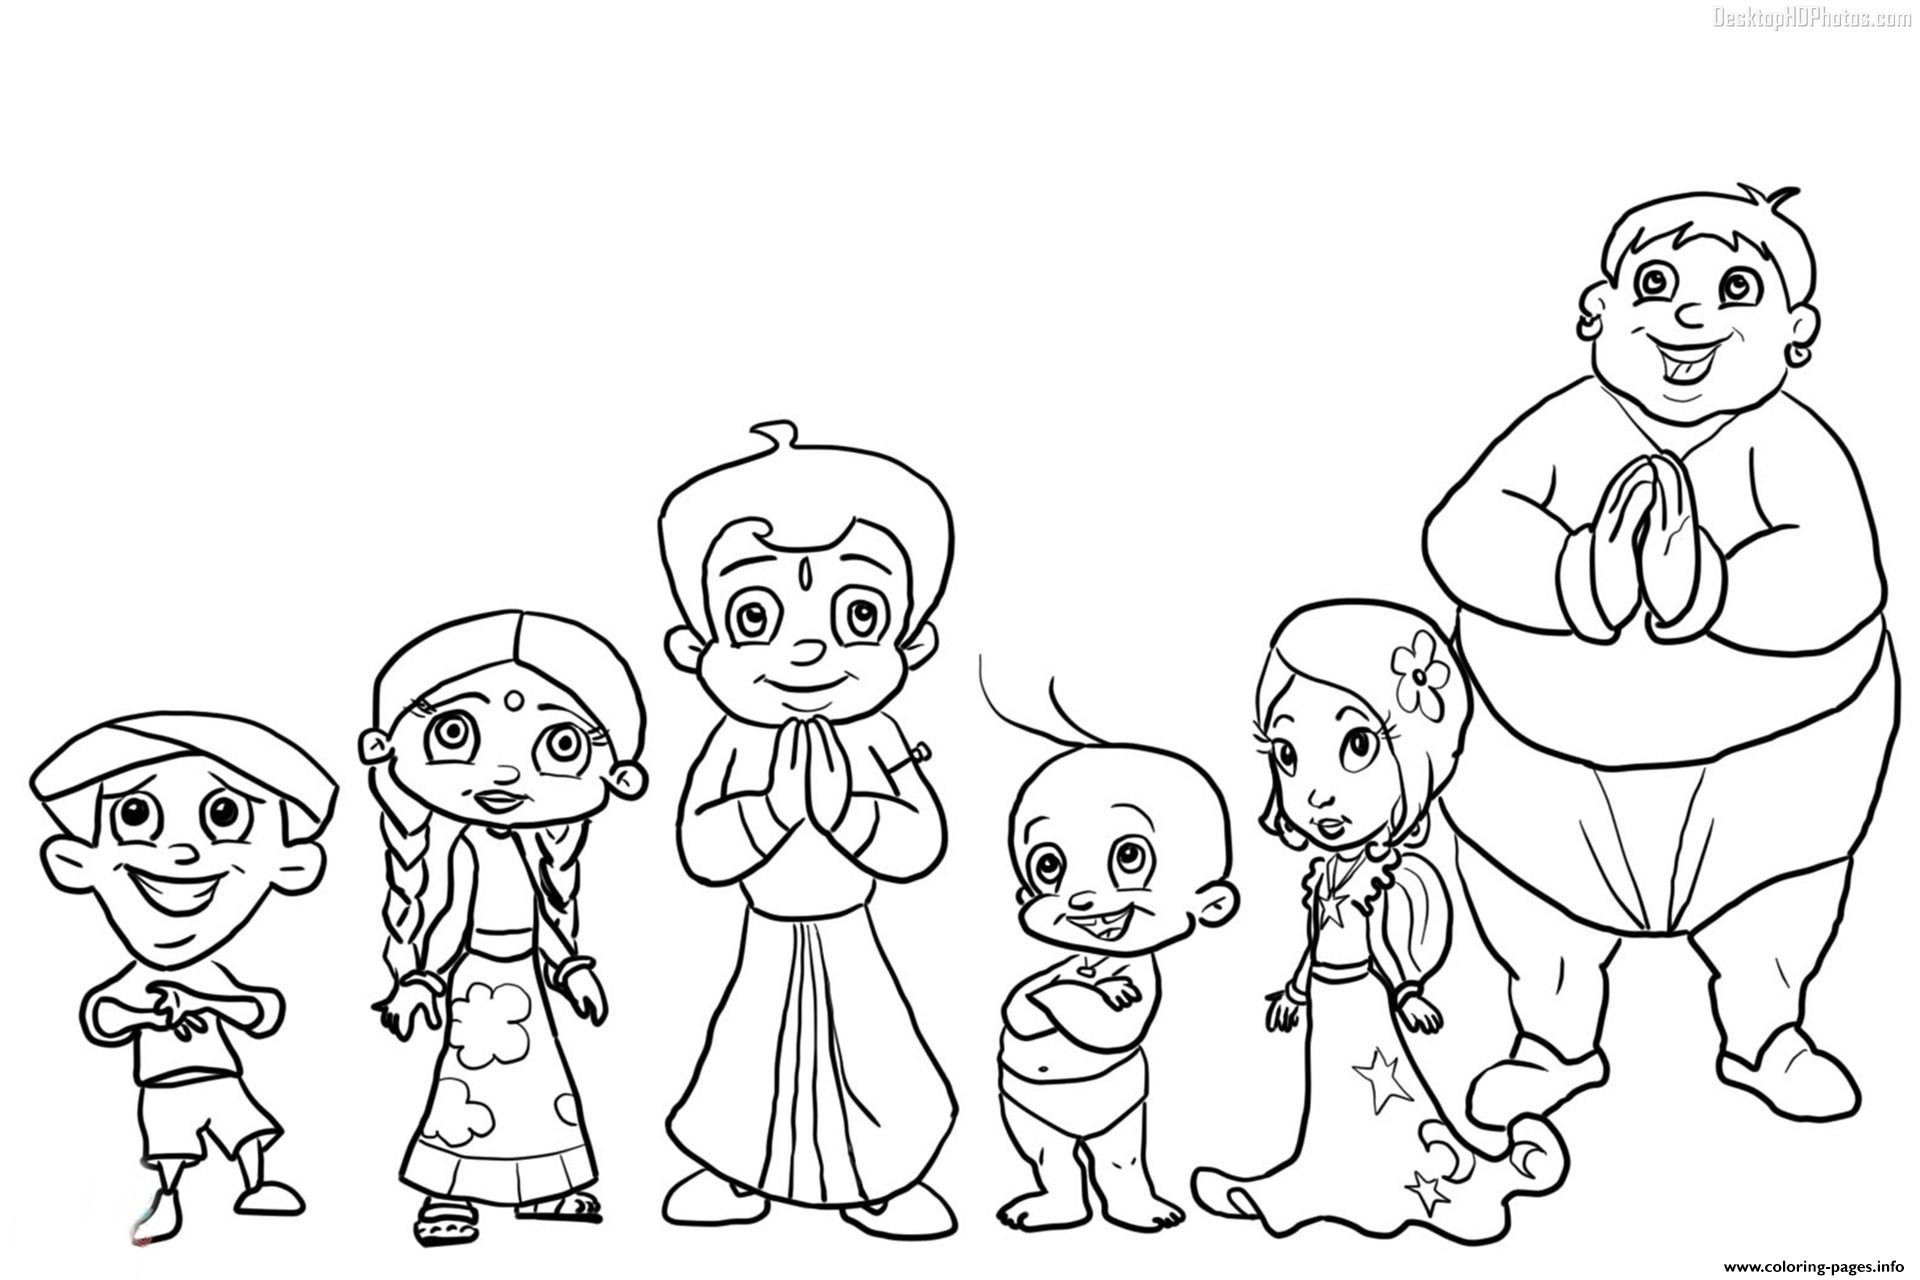 Chota Bheem Coloring Pages Chota Bheem Team Coloring Pages Printable